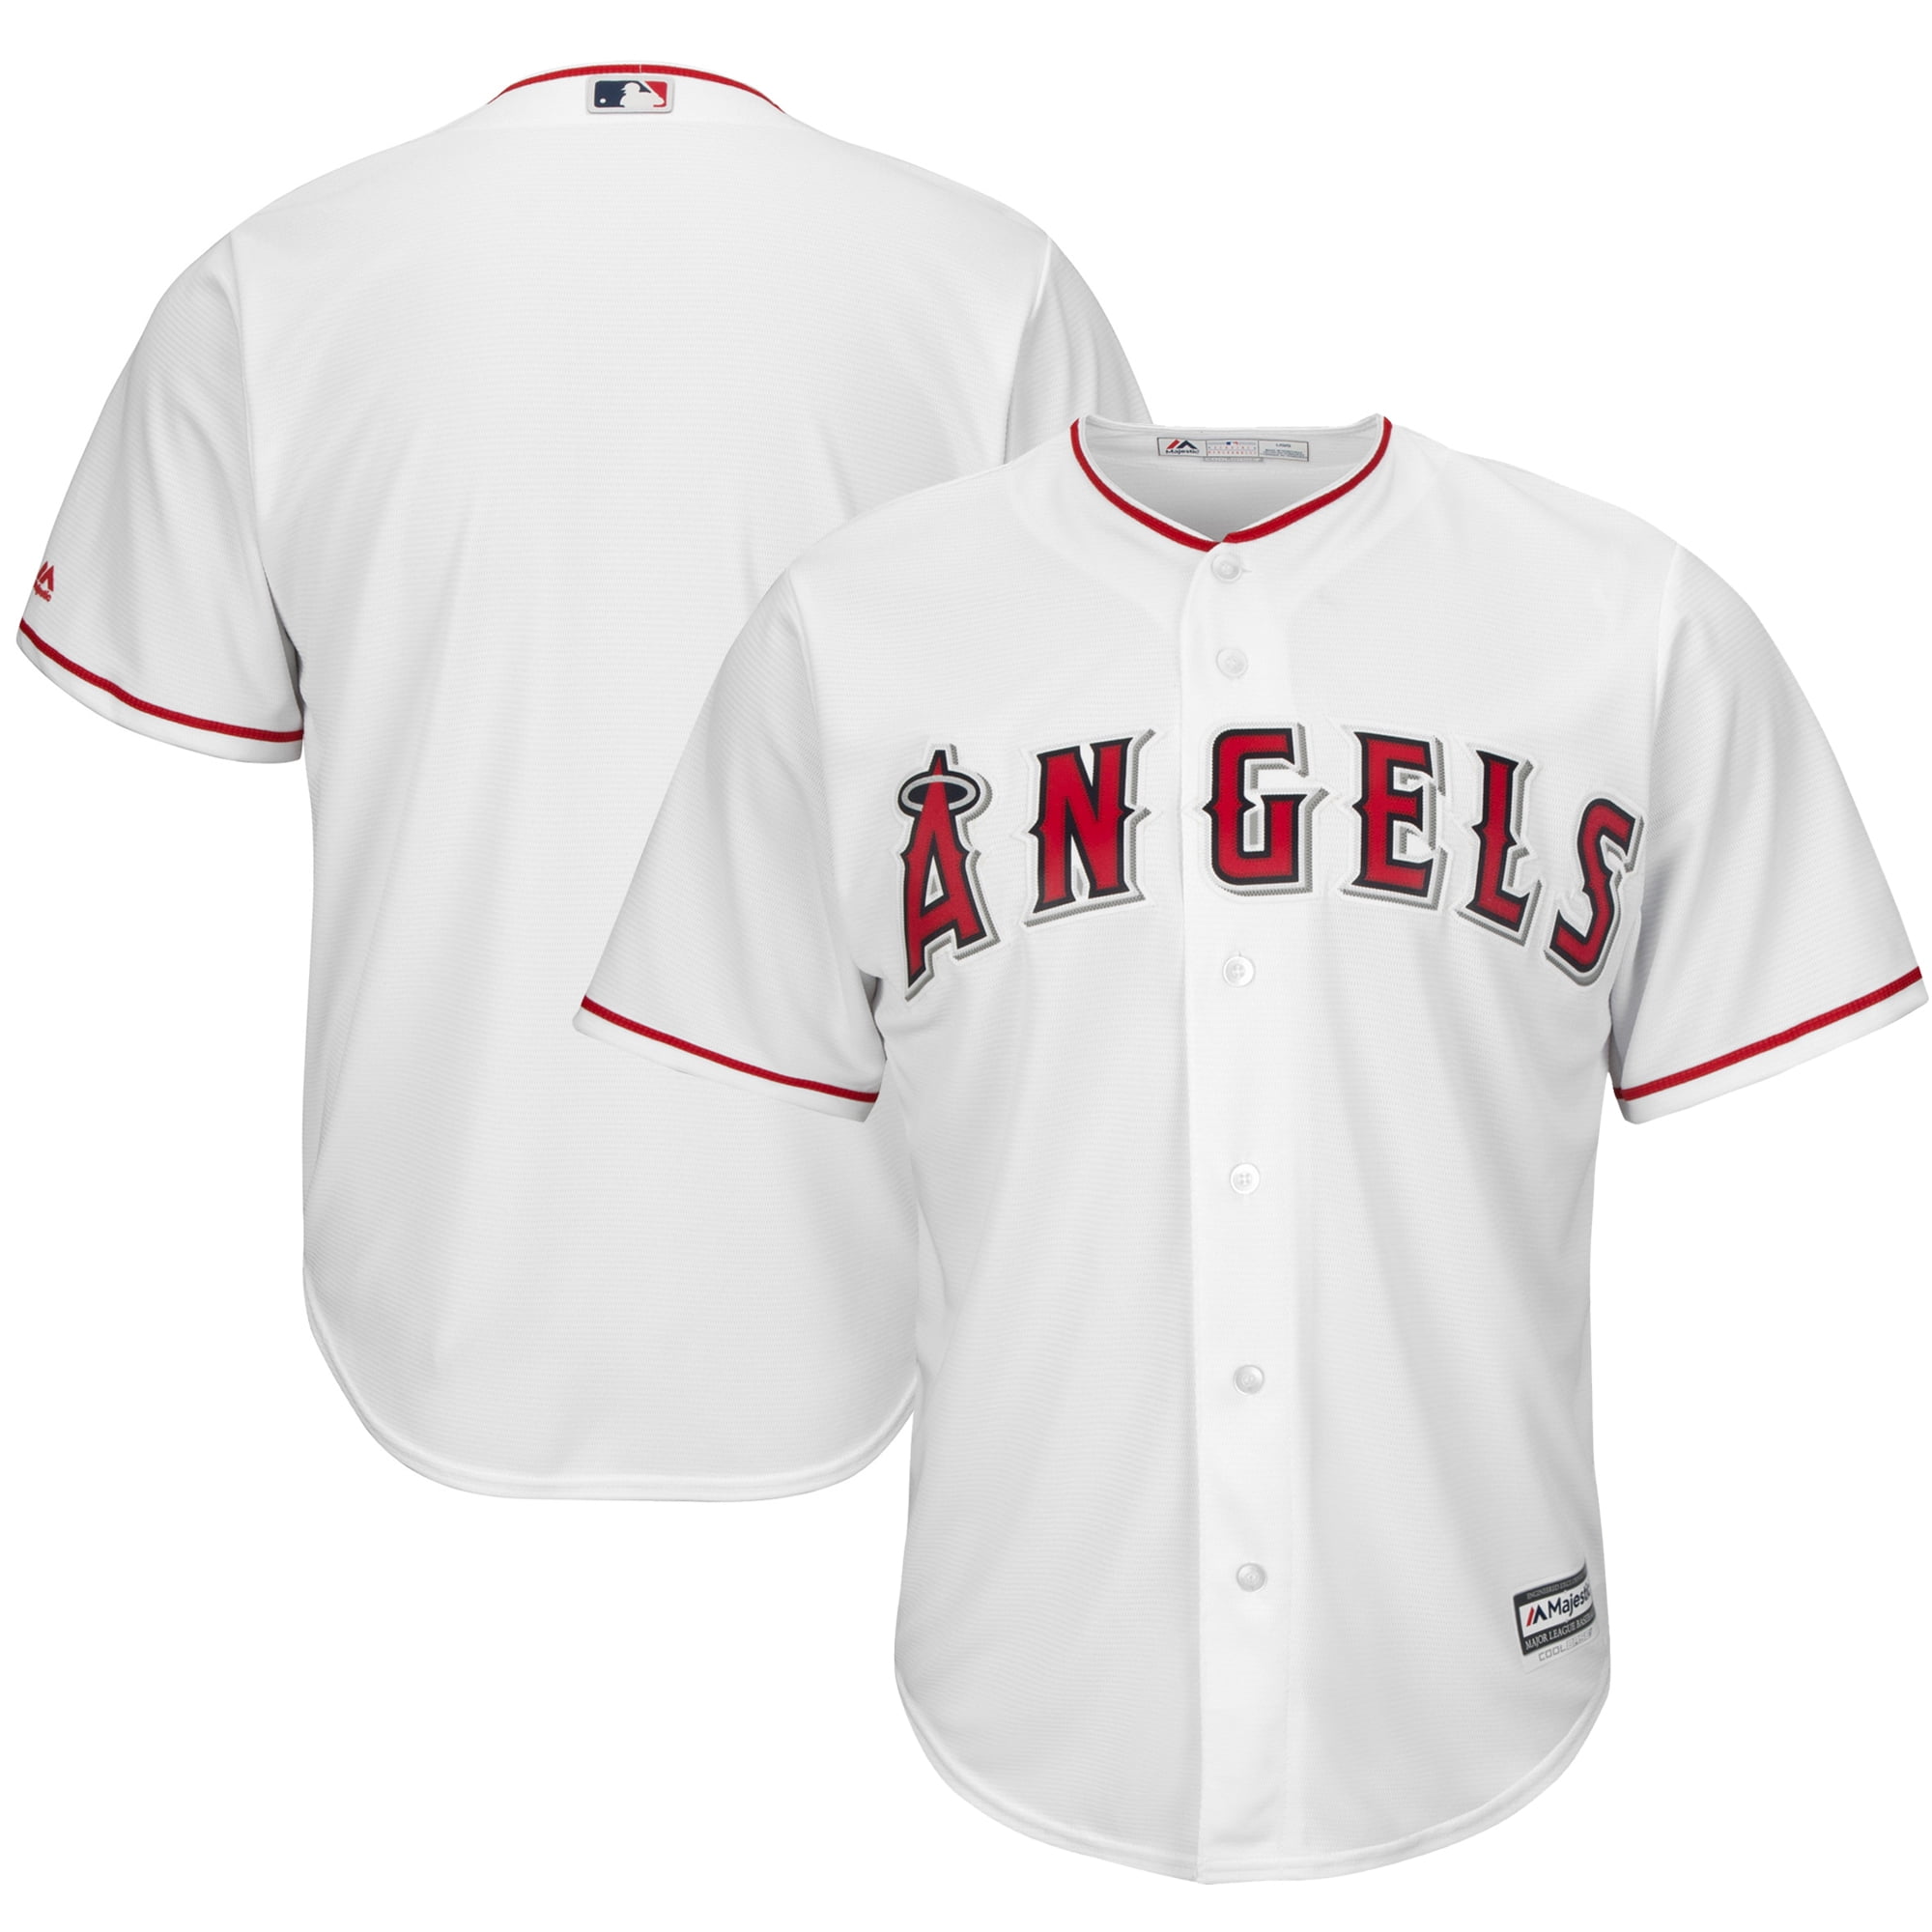 Los Angeles Angels Majestic []Official<img src=